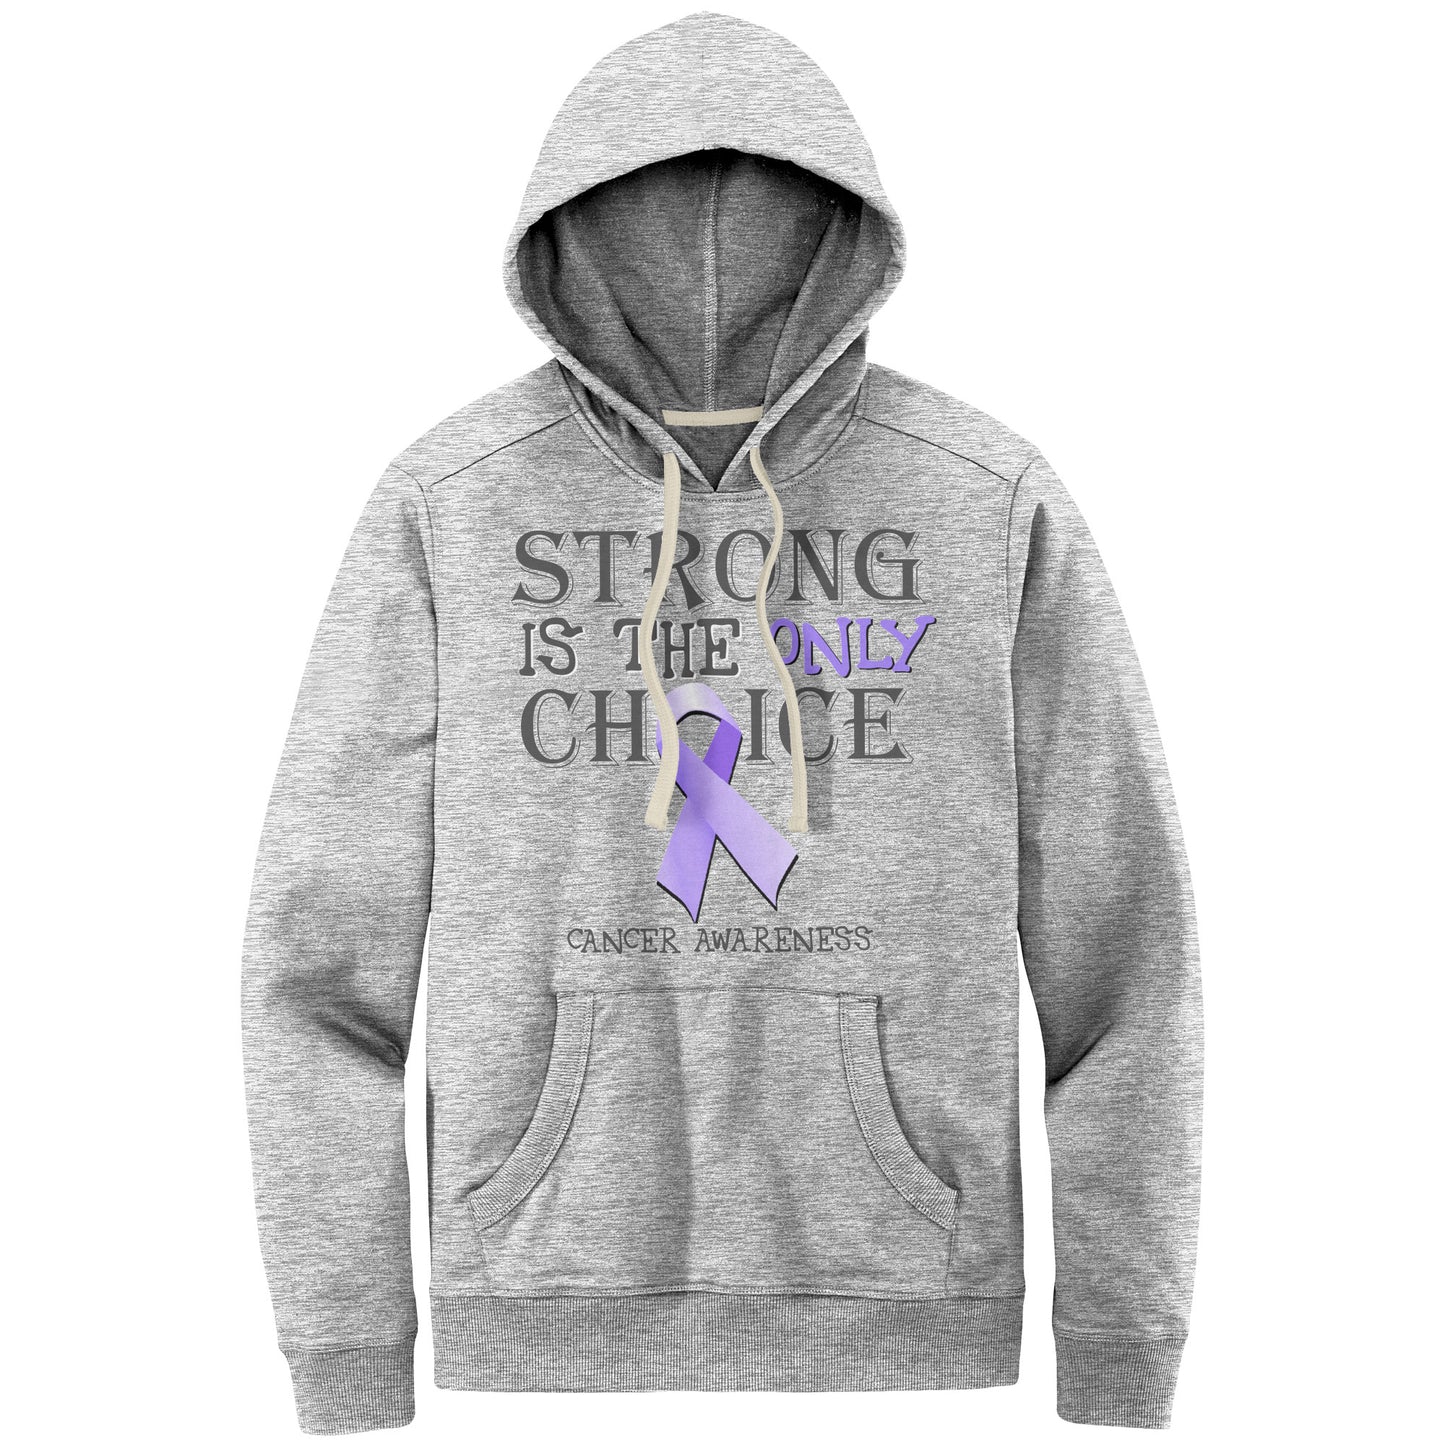 Strong is the Only Choice -Cancer Awareness T-Shirt, Hoodie, Tank